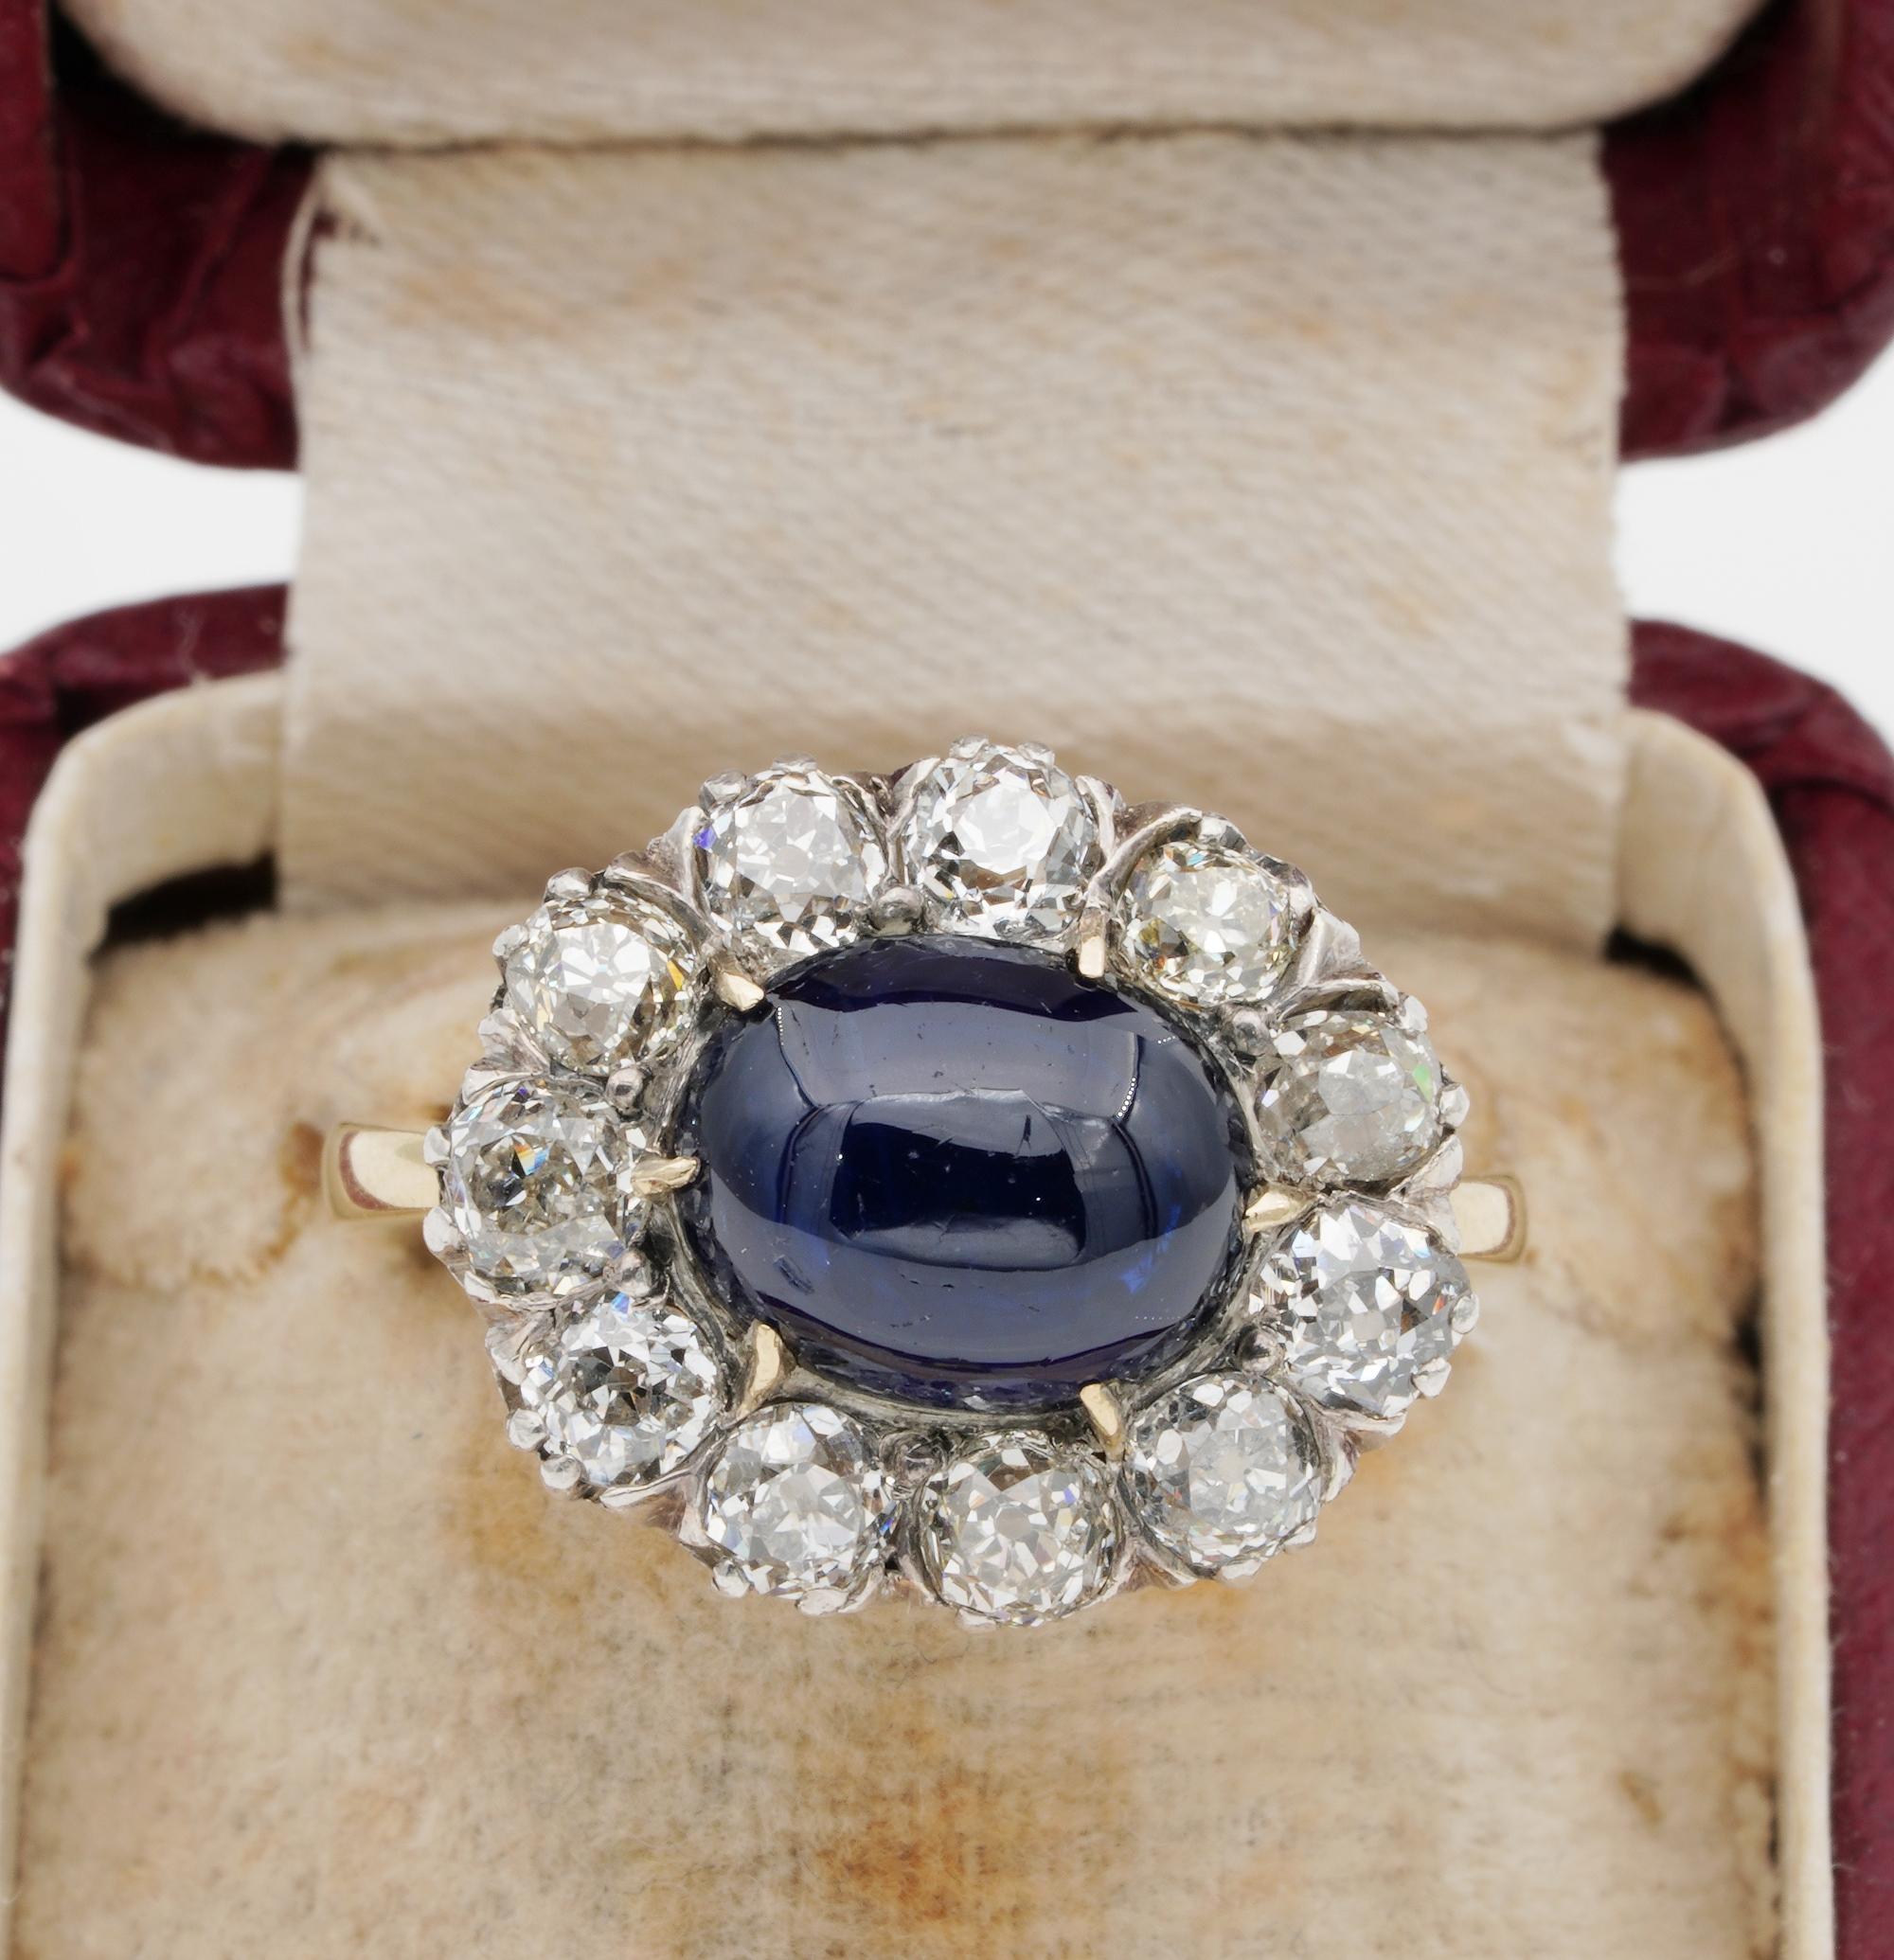 The Glorious Victorian

A favourite in the Victorian tradition was fine, natural Sapphire set in a rich Diamond halo
When considering Sapphires in terms of rarity, for sure antique, untreated, – Unheated gemstones are in the 1st place of value and